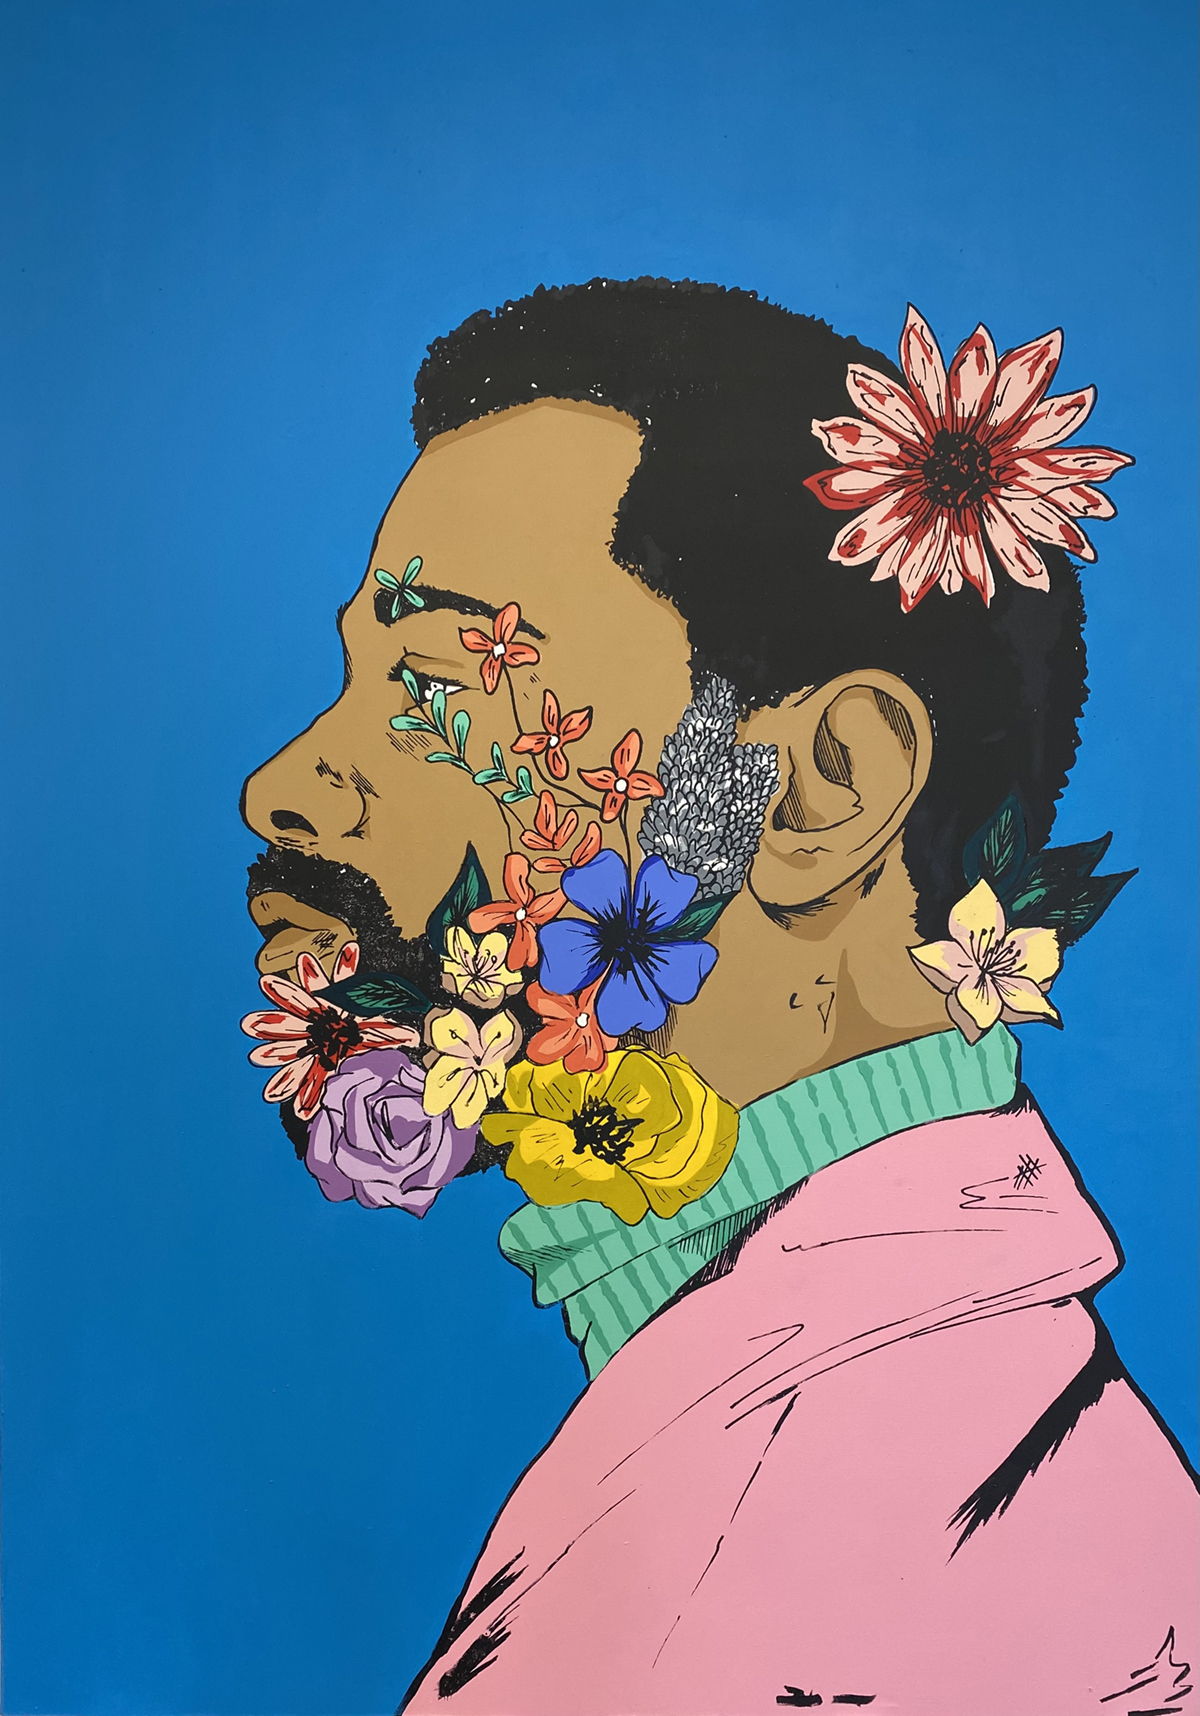 Blue background, with a man with flowers on his face in the foreground, by Cherry Aribisala.